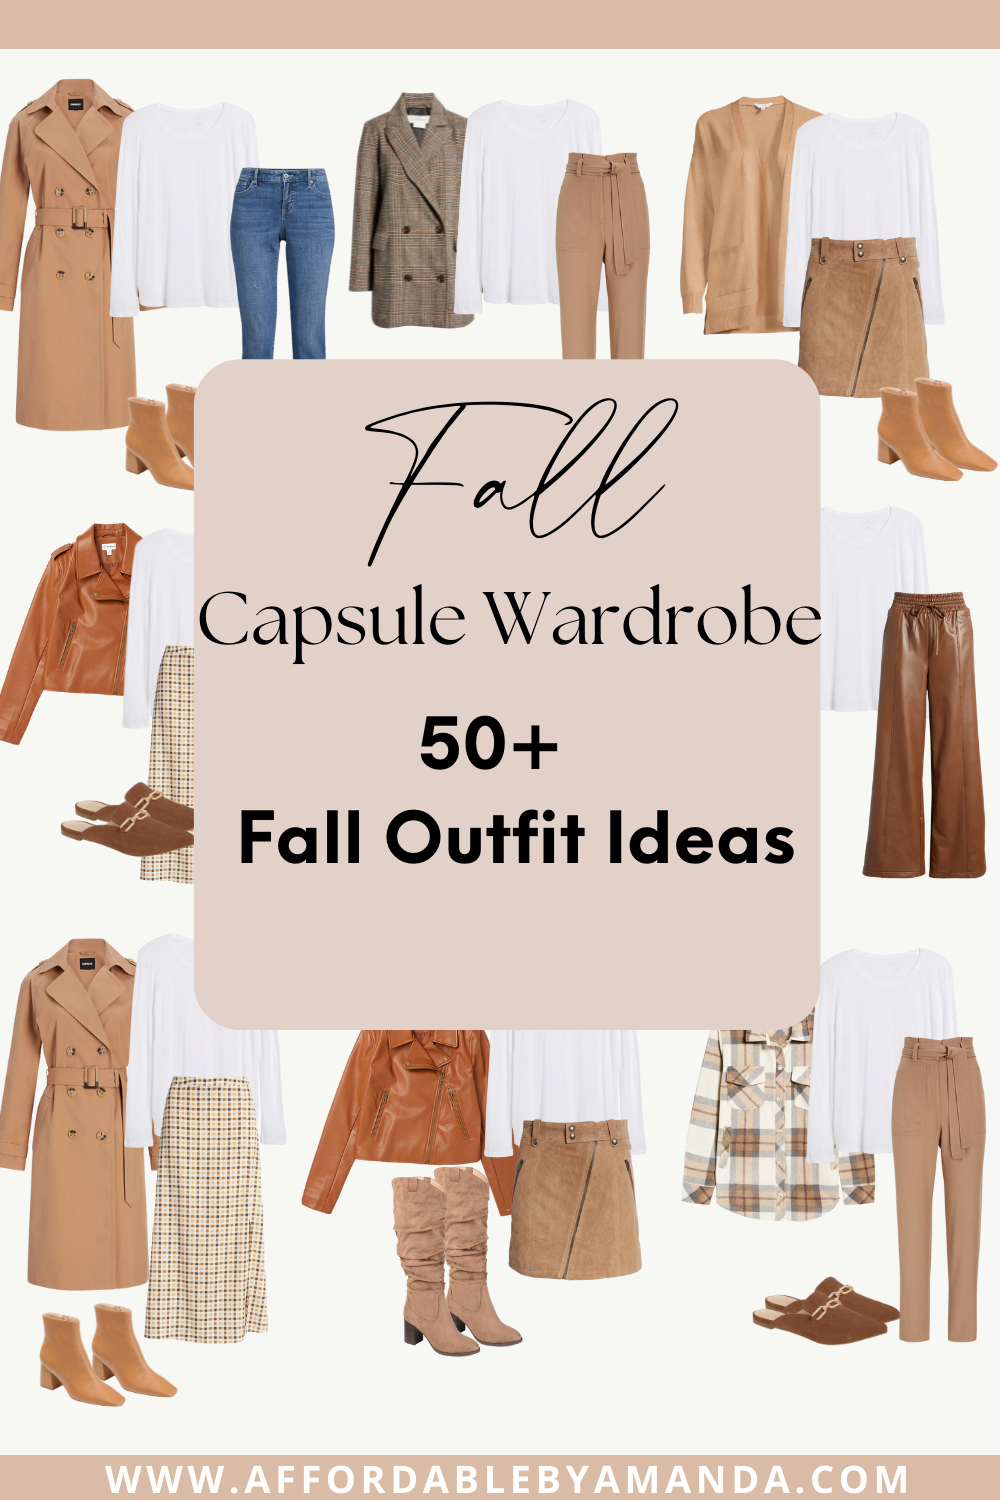 10 Capsule Wardrobe Pieces Every Woman Should Own at 50+